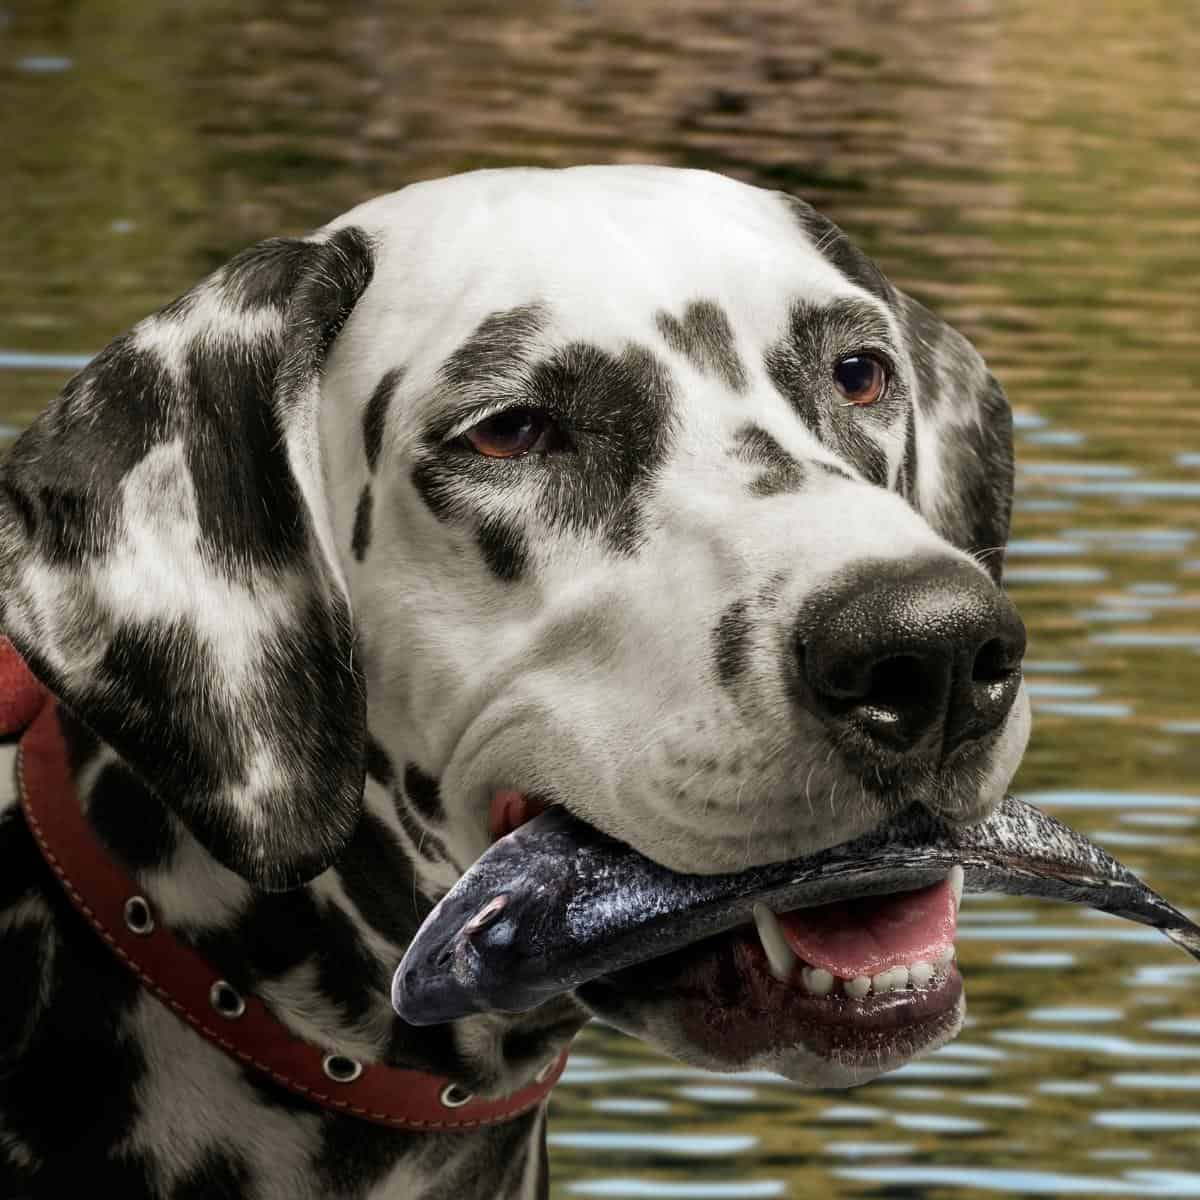 Dalmatian dog with a fish in his mouth